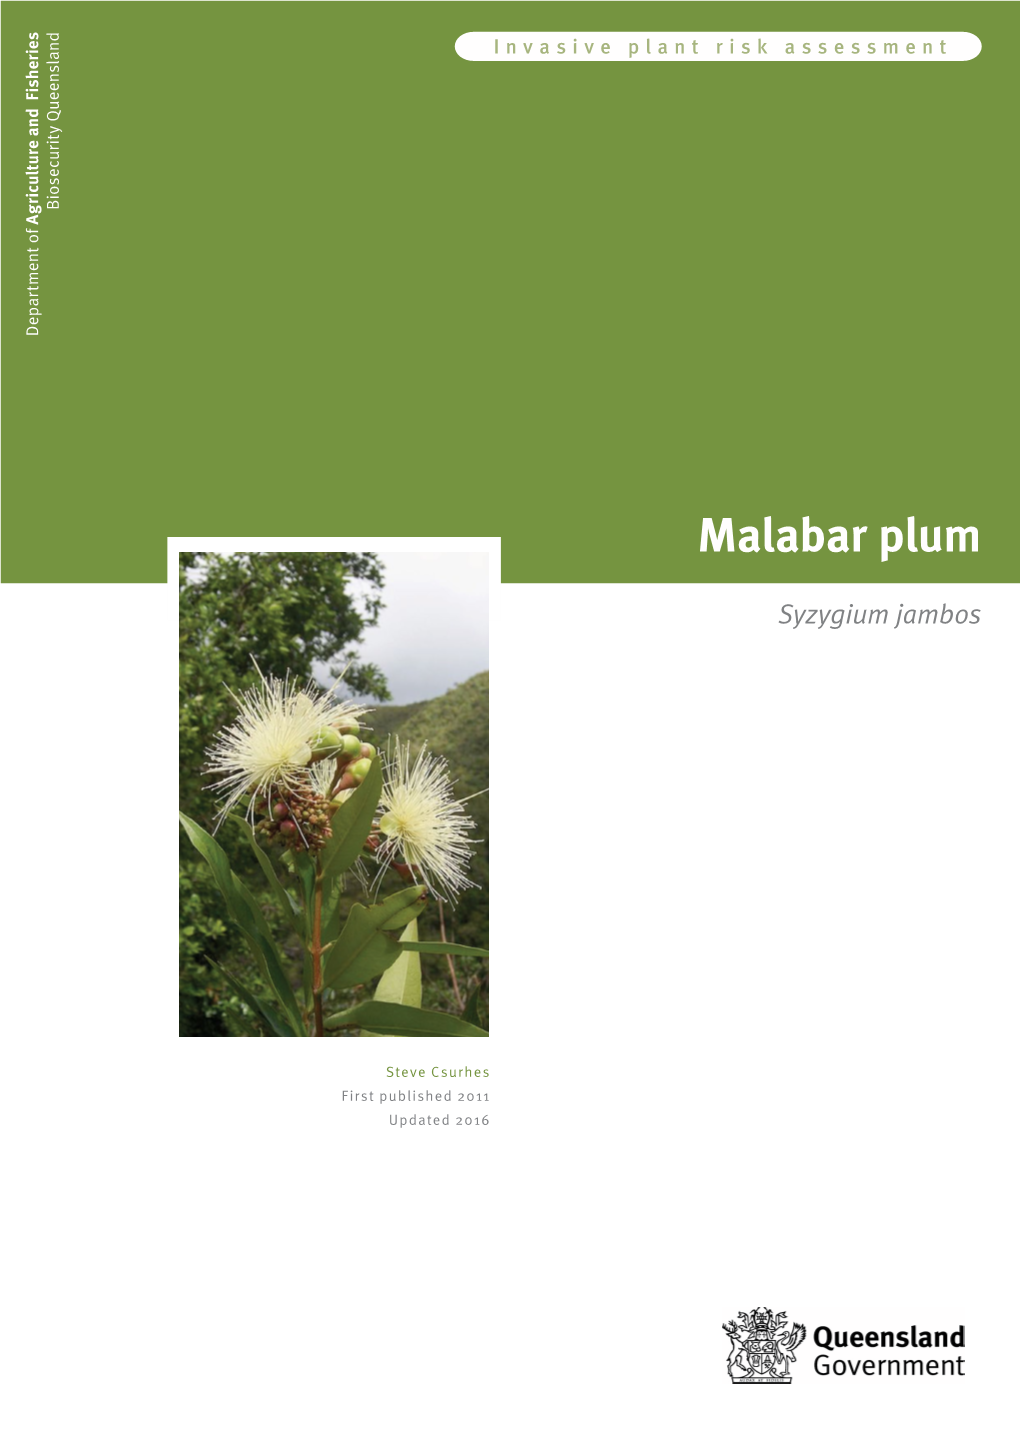 Malabar Plum (Syzygium Jambos) Is a Shrub Native to South-East Asia